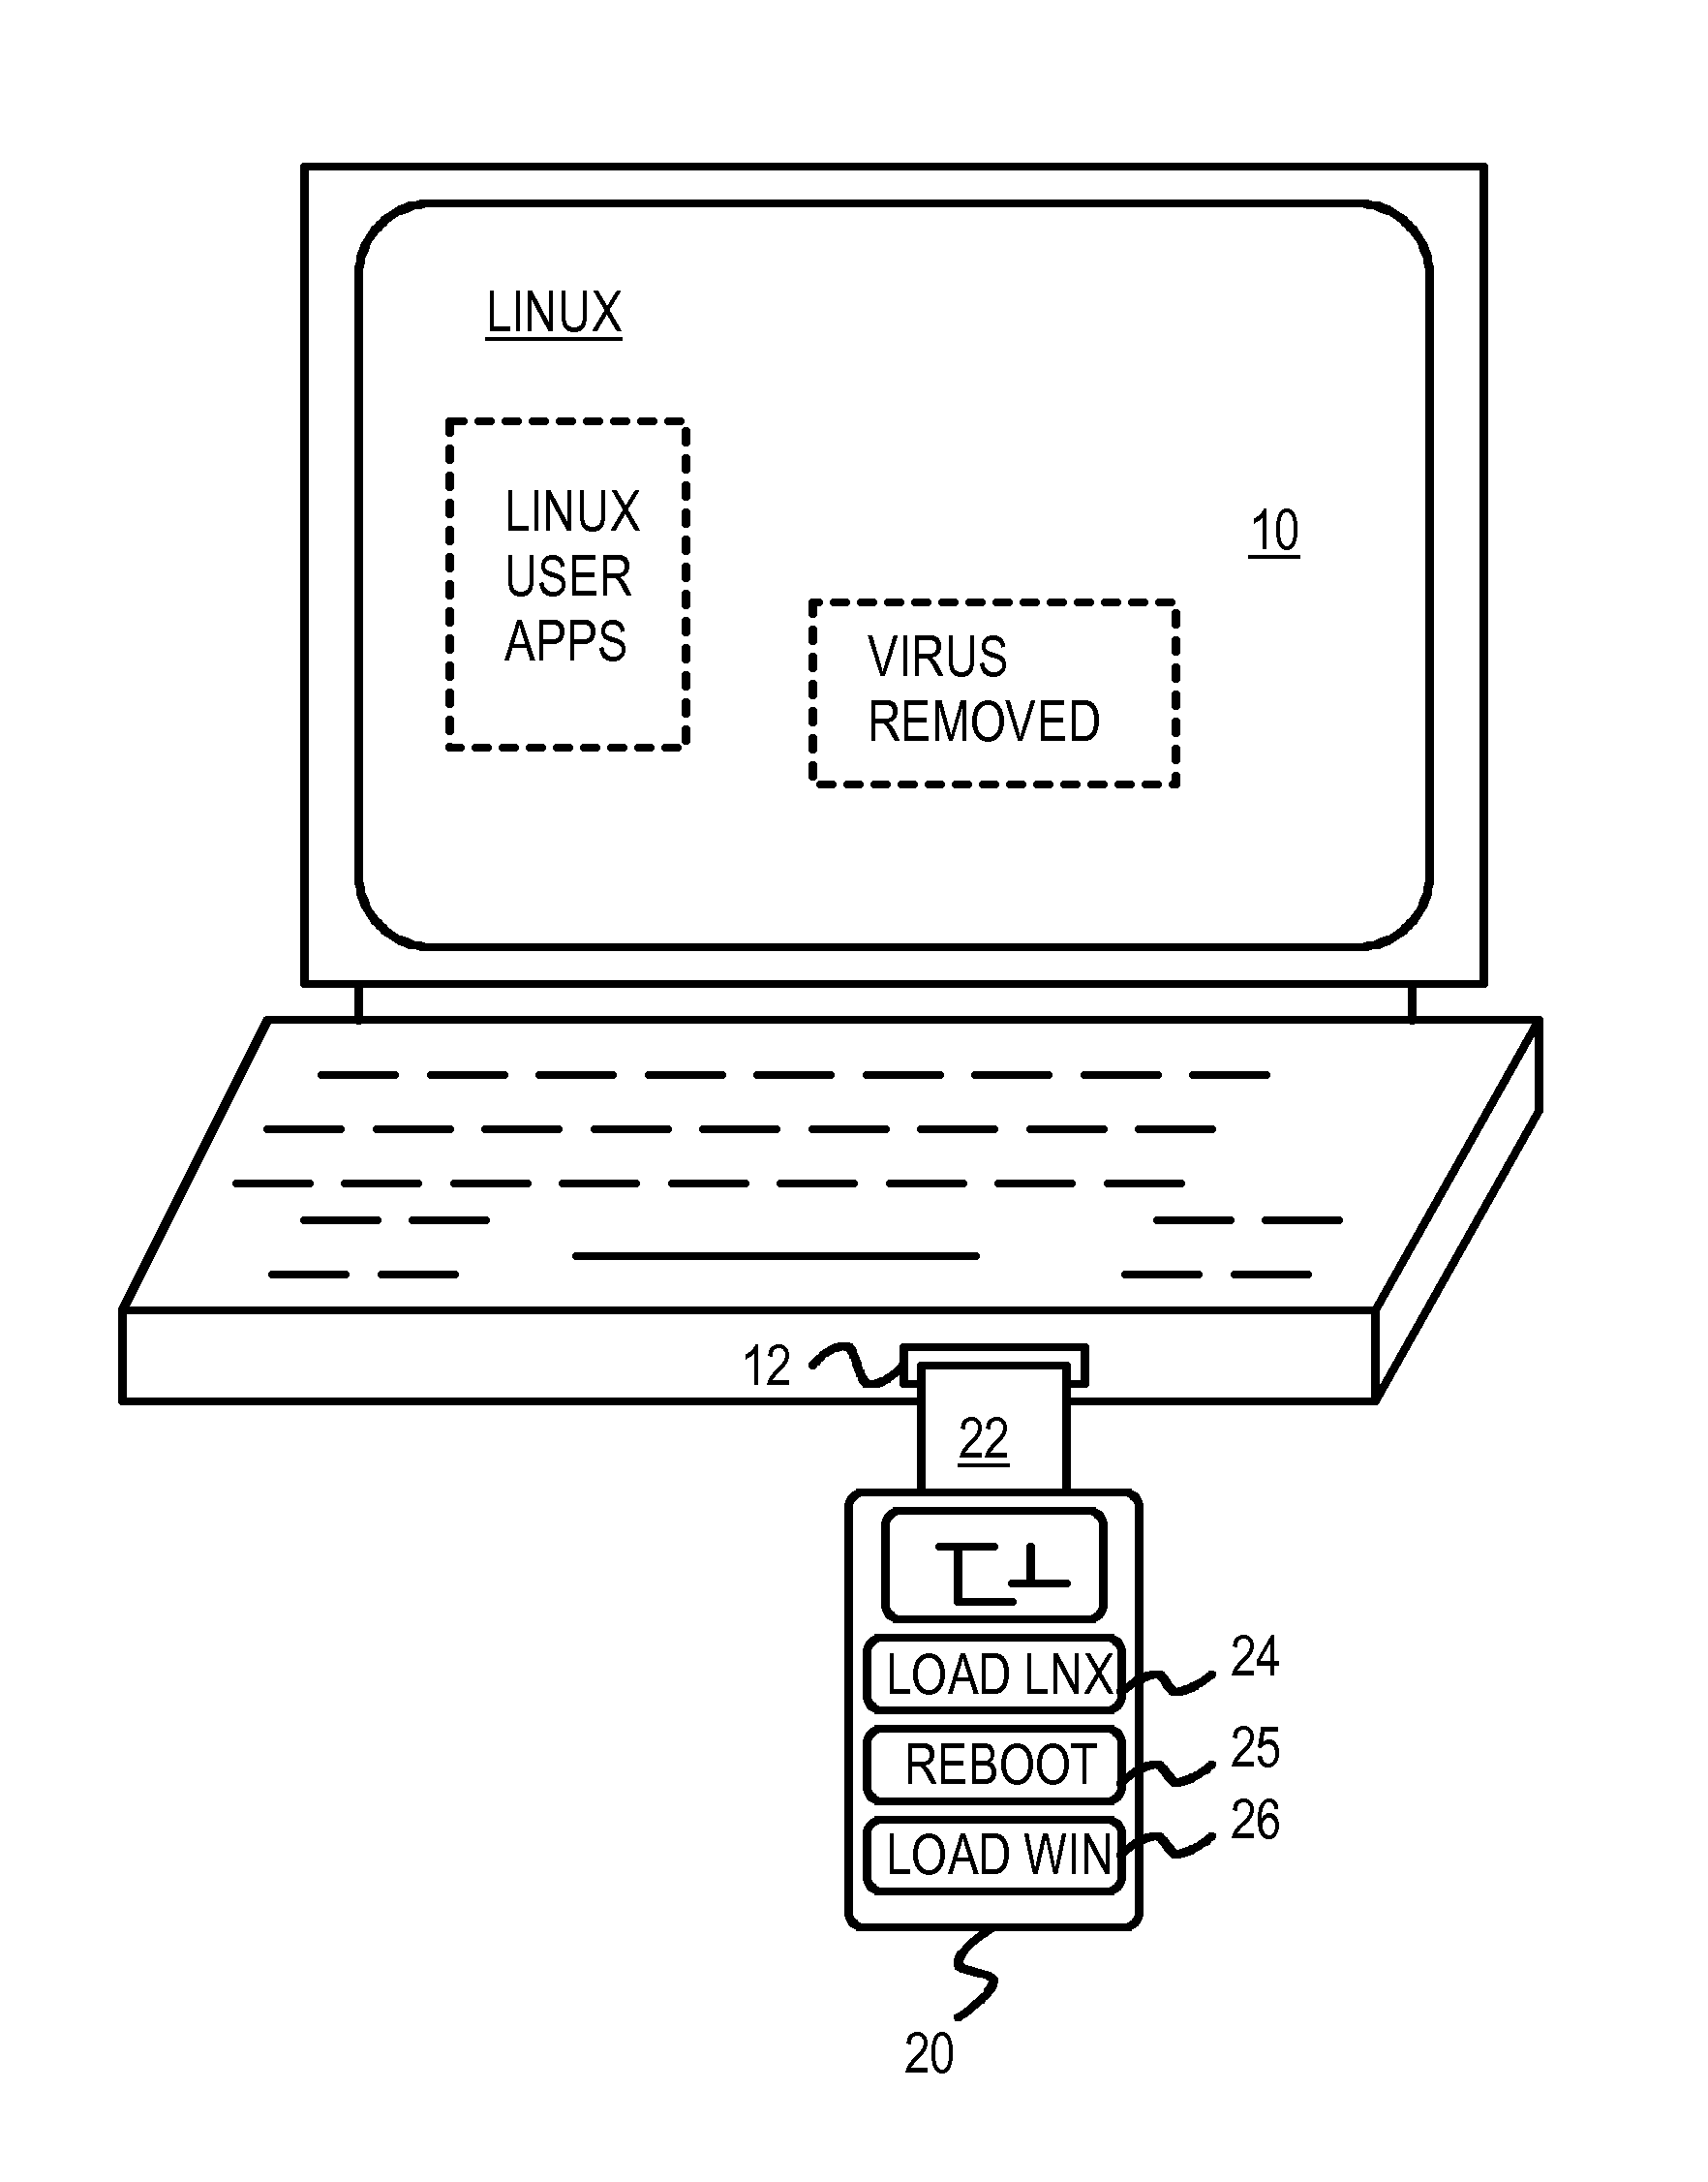 Multi-Partition USB Device that Re-Boots a PC to an Alternate Operating System for Virus Recovery